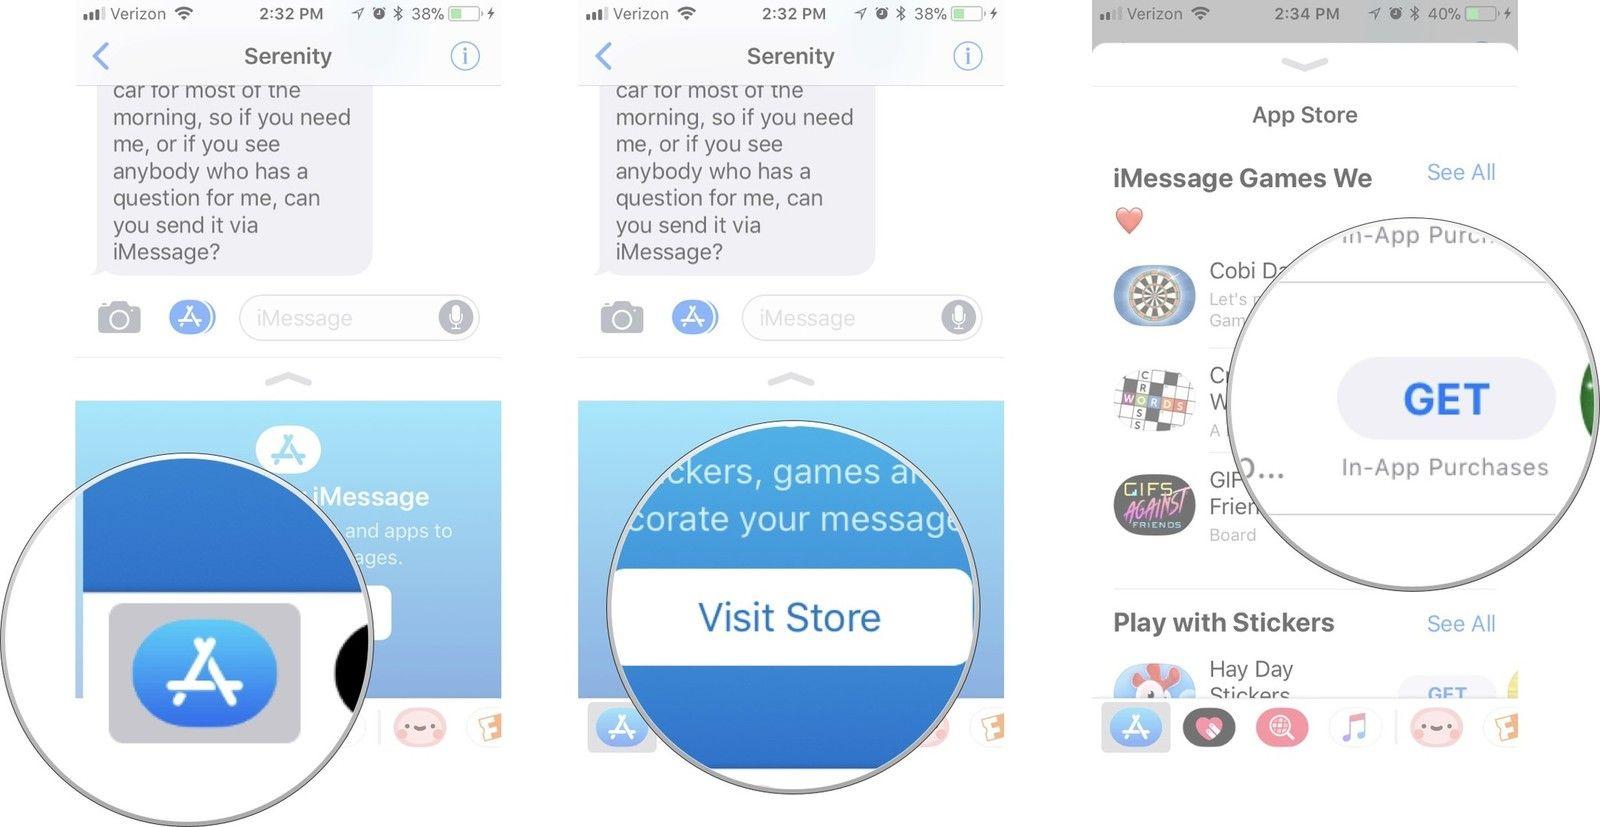 iMessage App Logo - How to use sticker and apps in iMessage on iPhone and iPad